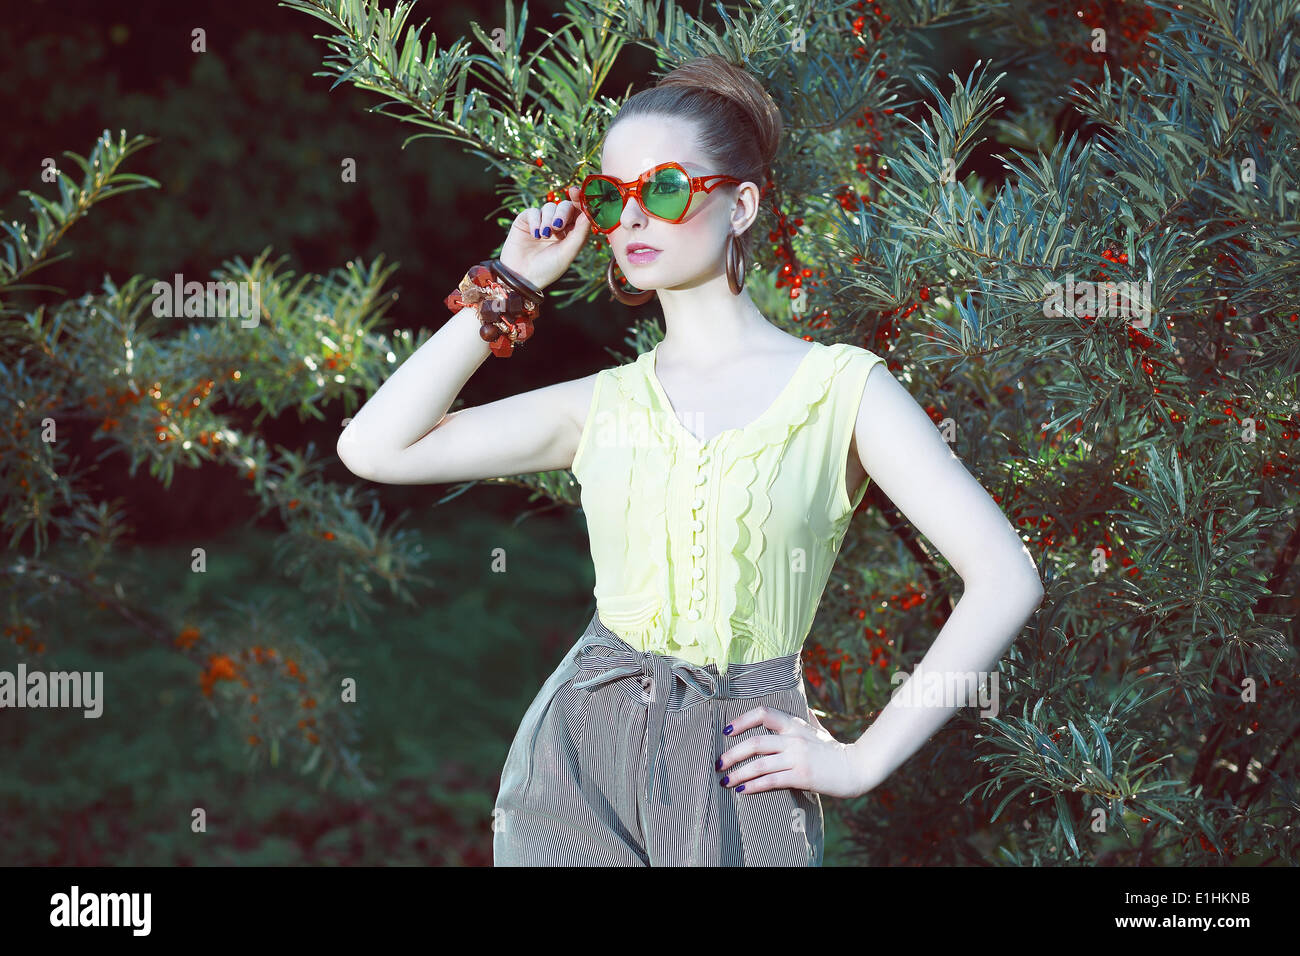 Charisma. Individuality. Luxurious Woman in Fancy Sunglasses Outside Stock Photo